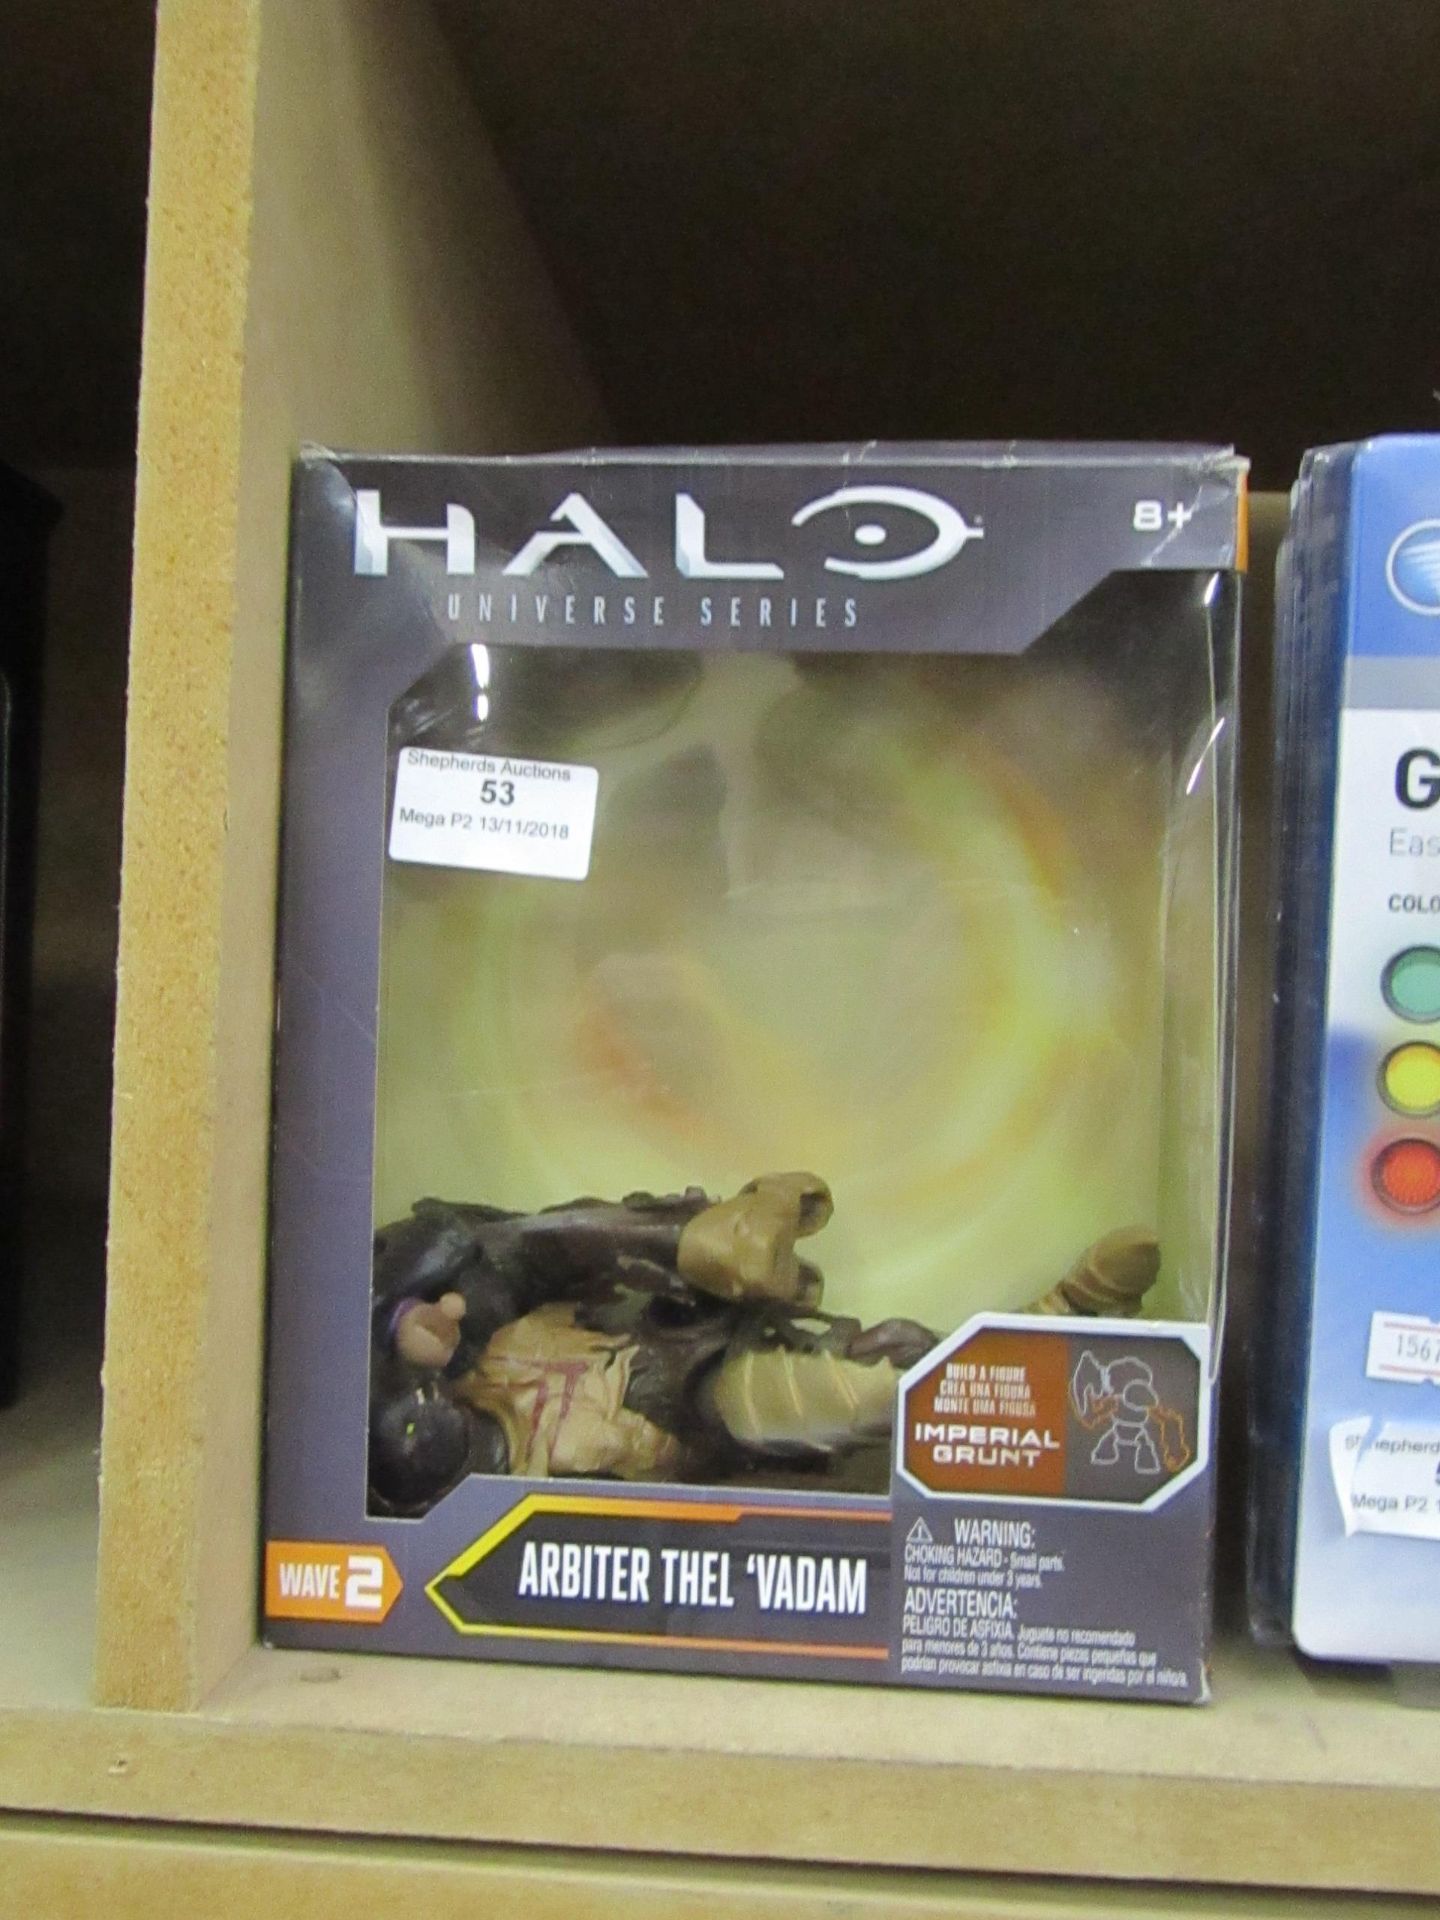 Halo Ambiter Thel 'Vadam figurine, unchecked and boxed.